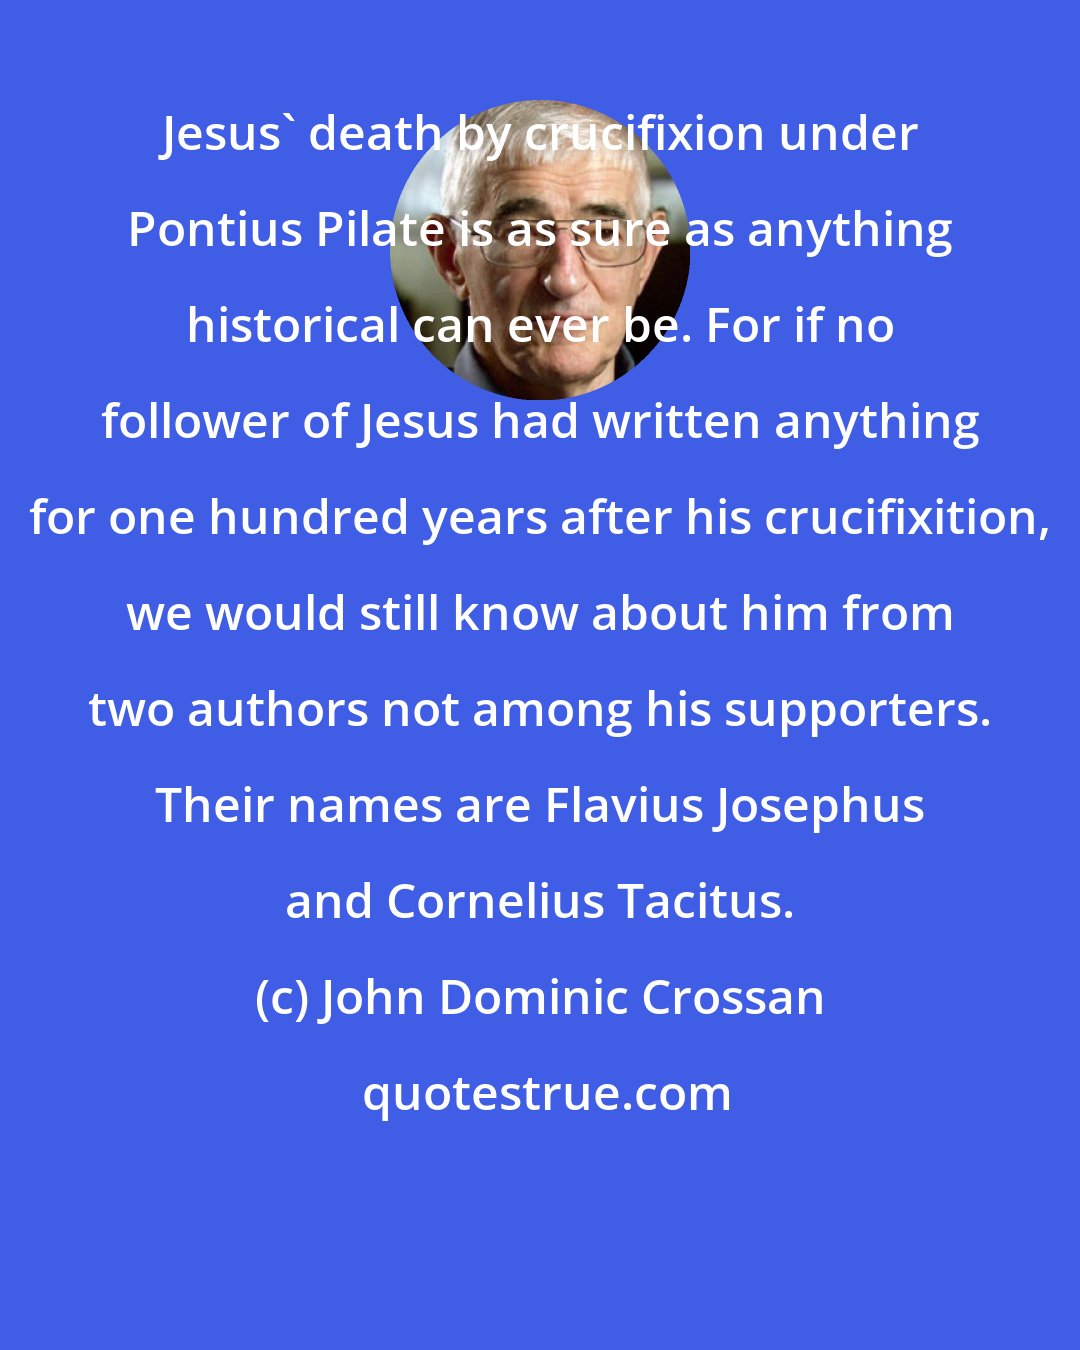 John Dominic Crossan: Jesus' death by crucifixion under Pontius Pilate is as sure as anything historical can ever be. For if no follower of Jesus had written anything for one hundred years after his crucifixition, we would still know about him from two authors not among his supporters. Their names are Flavius Josephus and Cornelius Tacitus.